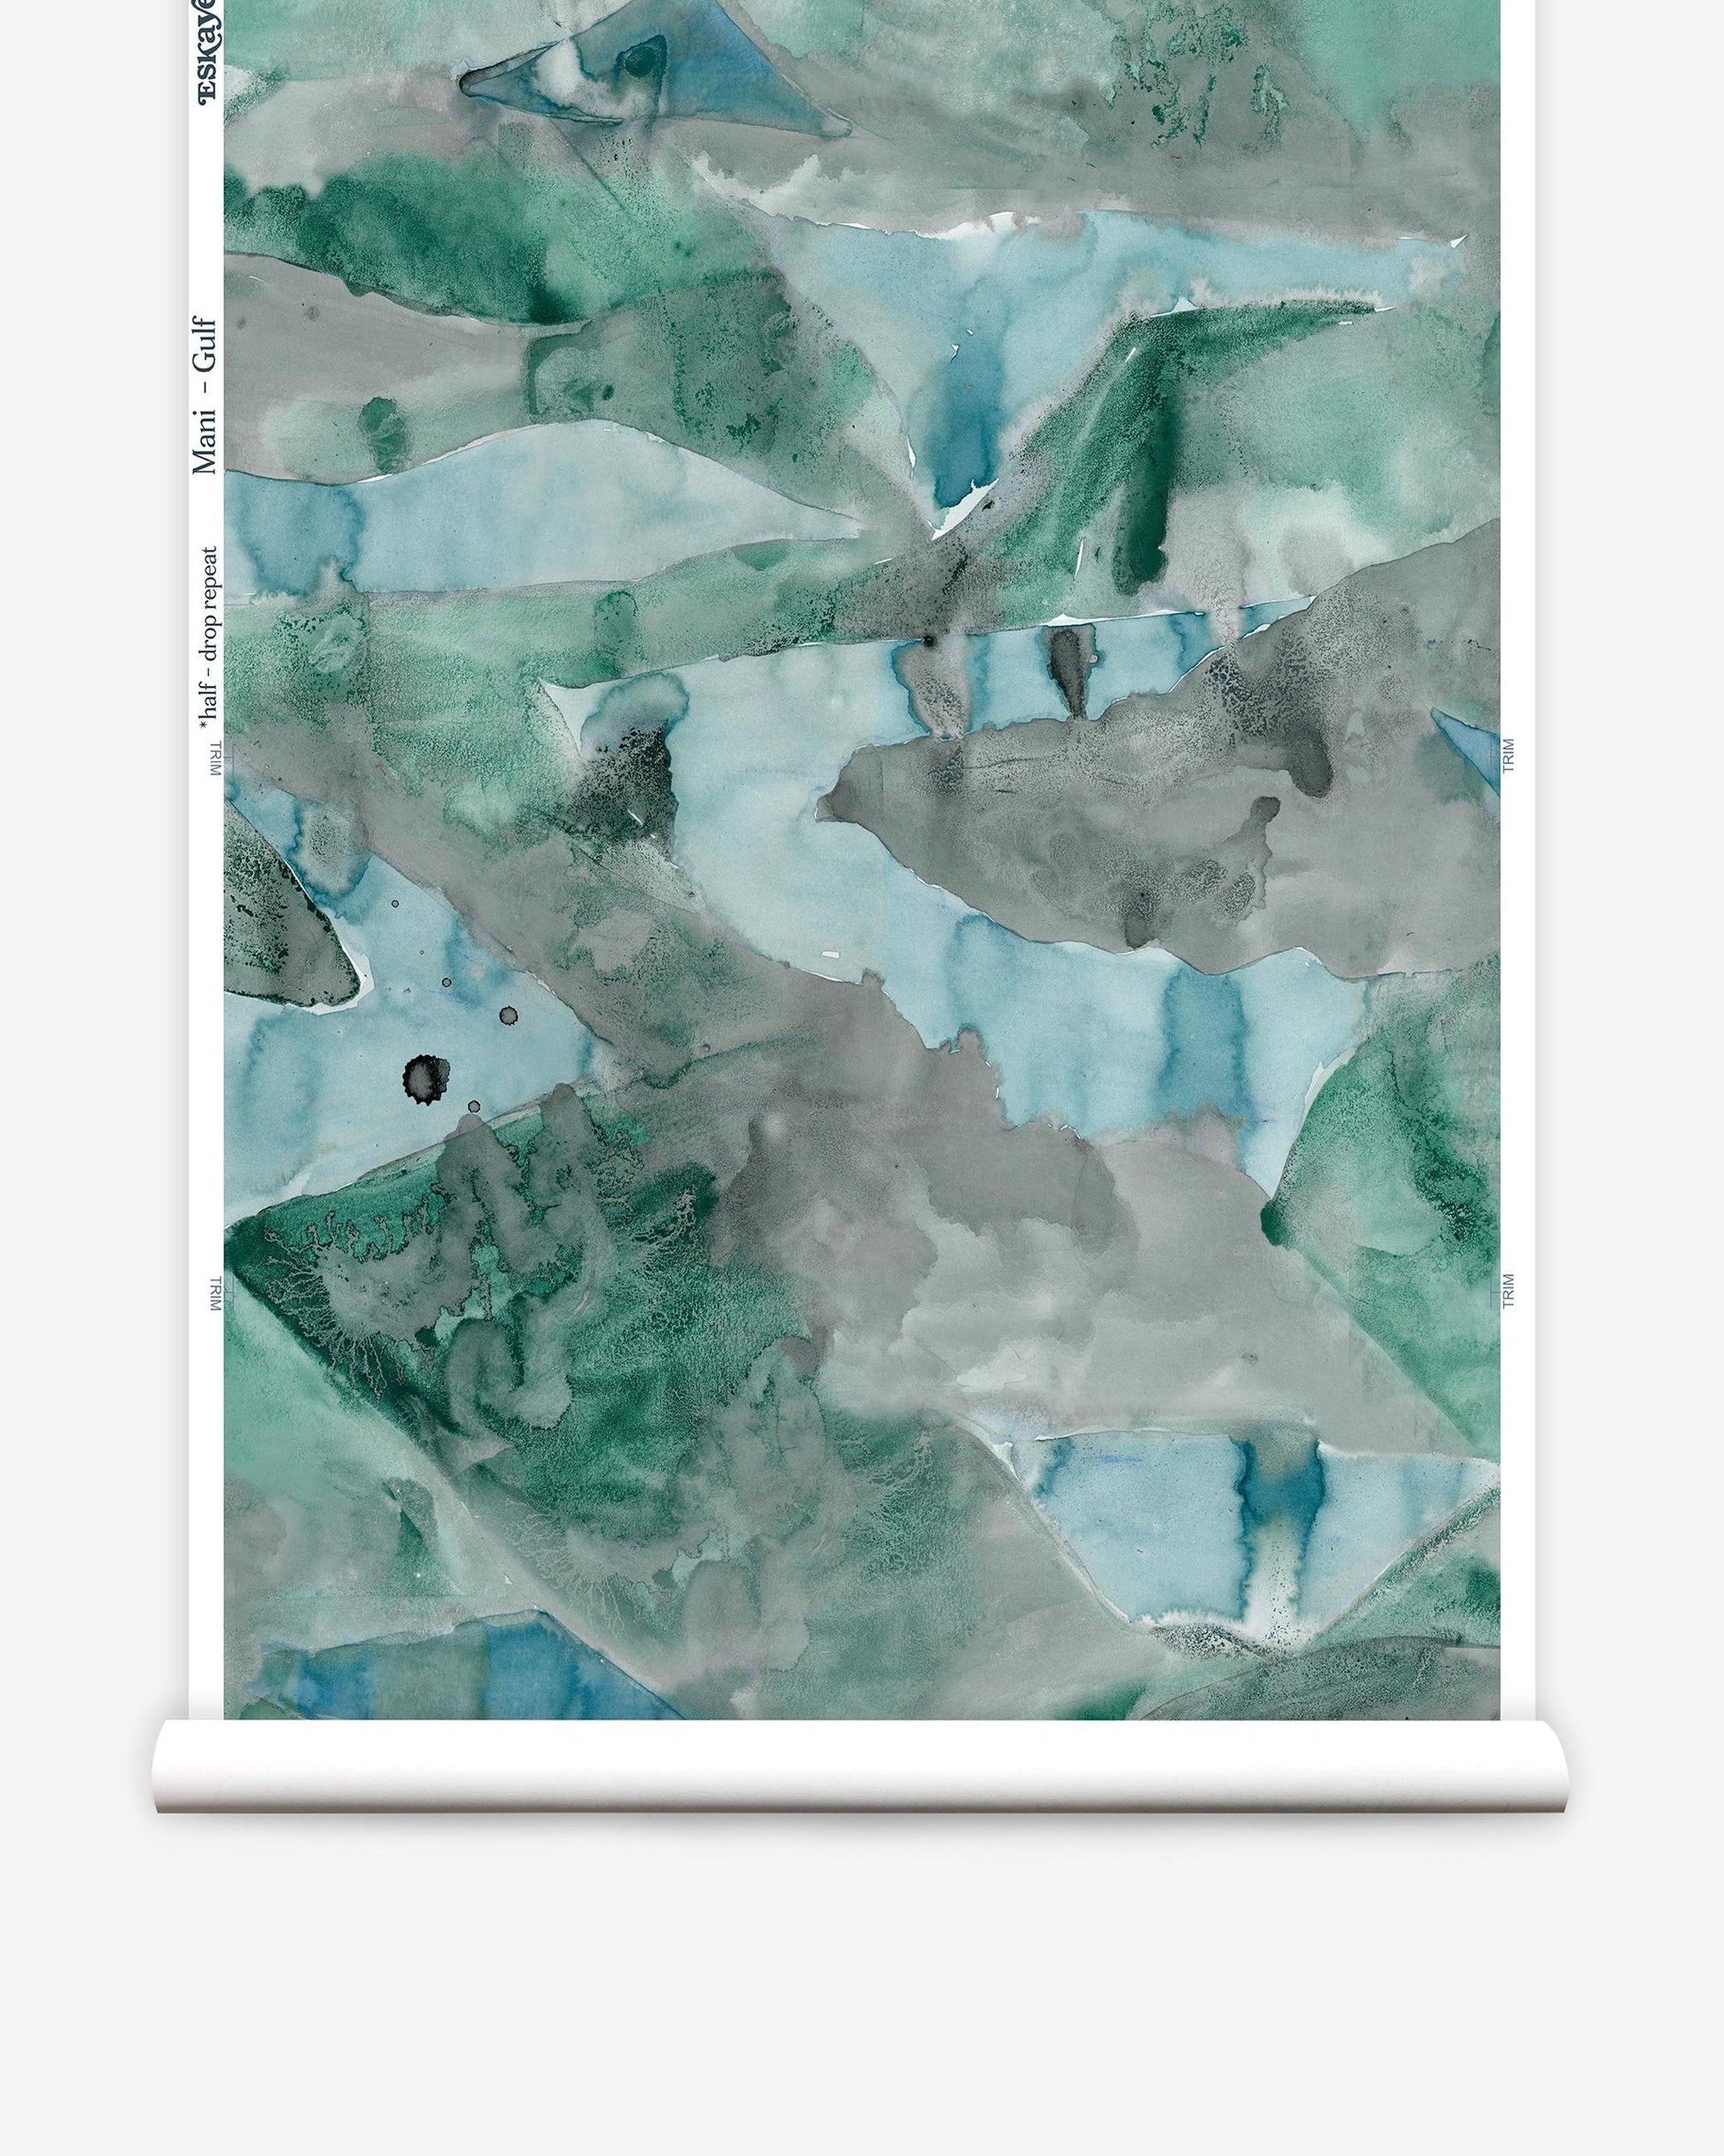 A painting inspired by Mani Wallpaper Gulf studies with a blue and green design